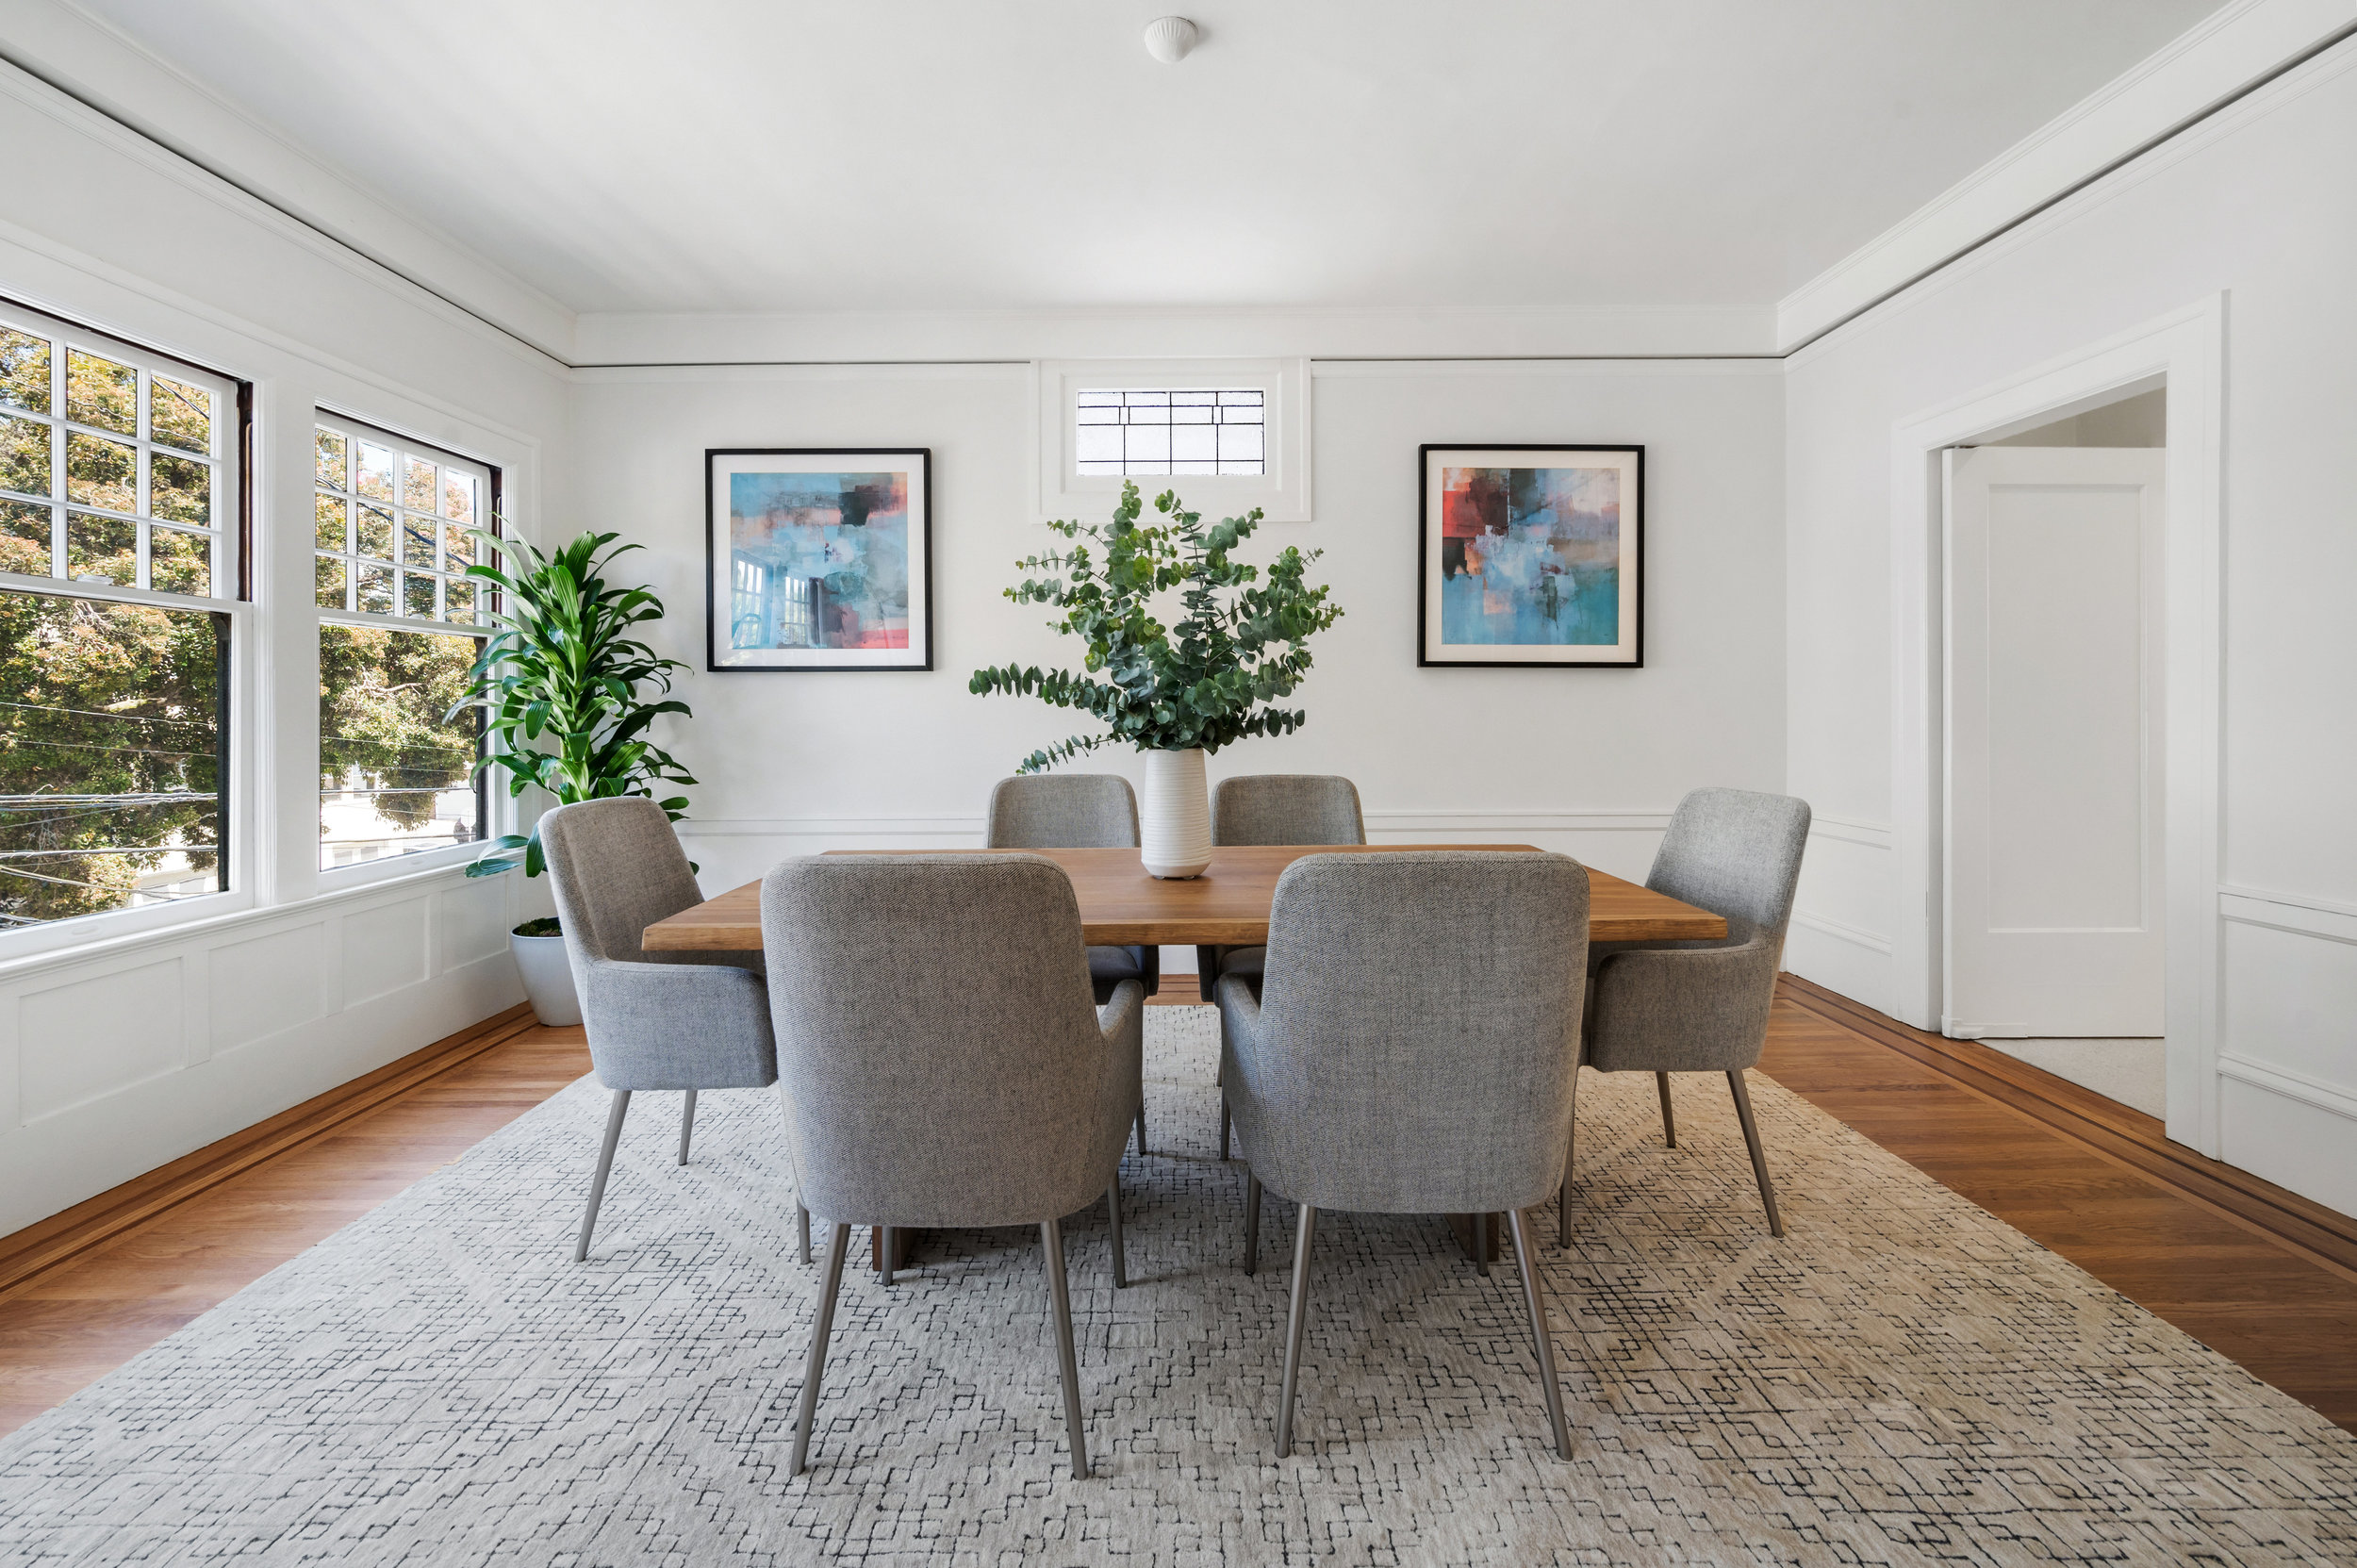 Property Photo: View of the formal dining room at 637-639 Lake Street, featuring wood floors